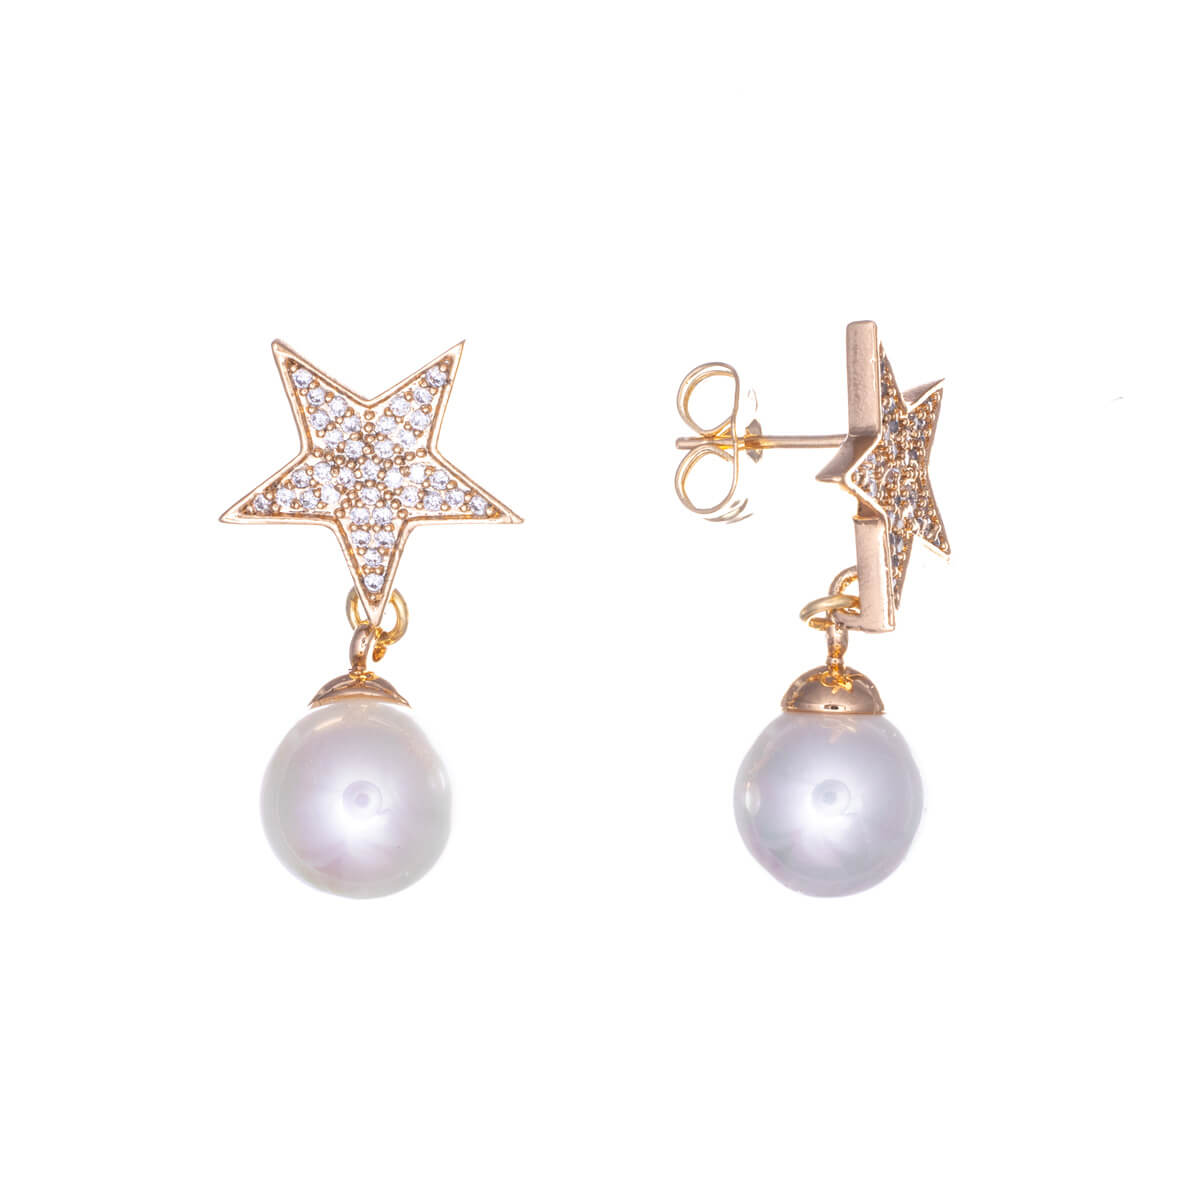 Star hanging pearl earring with zirconia stones